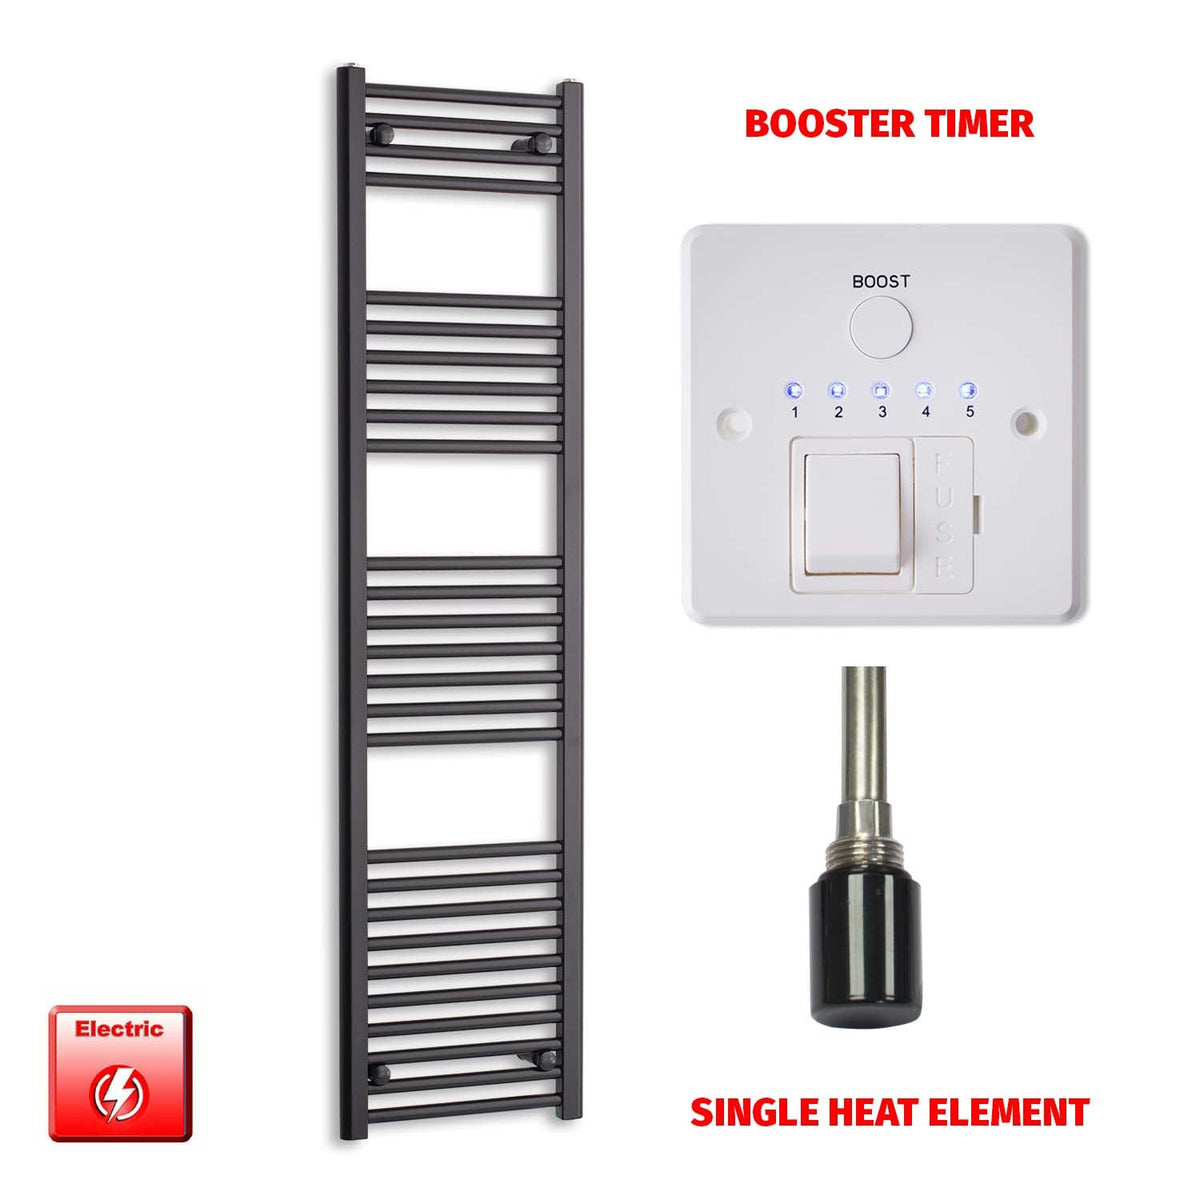 1600mm High 450mm Wide Flat Black Pre-Filled Electric Heated Towel Rail Radiator HTR Single bOOSTER Timer